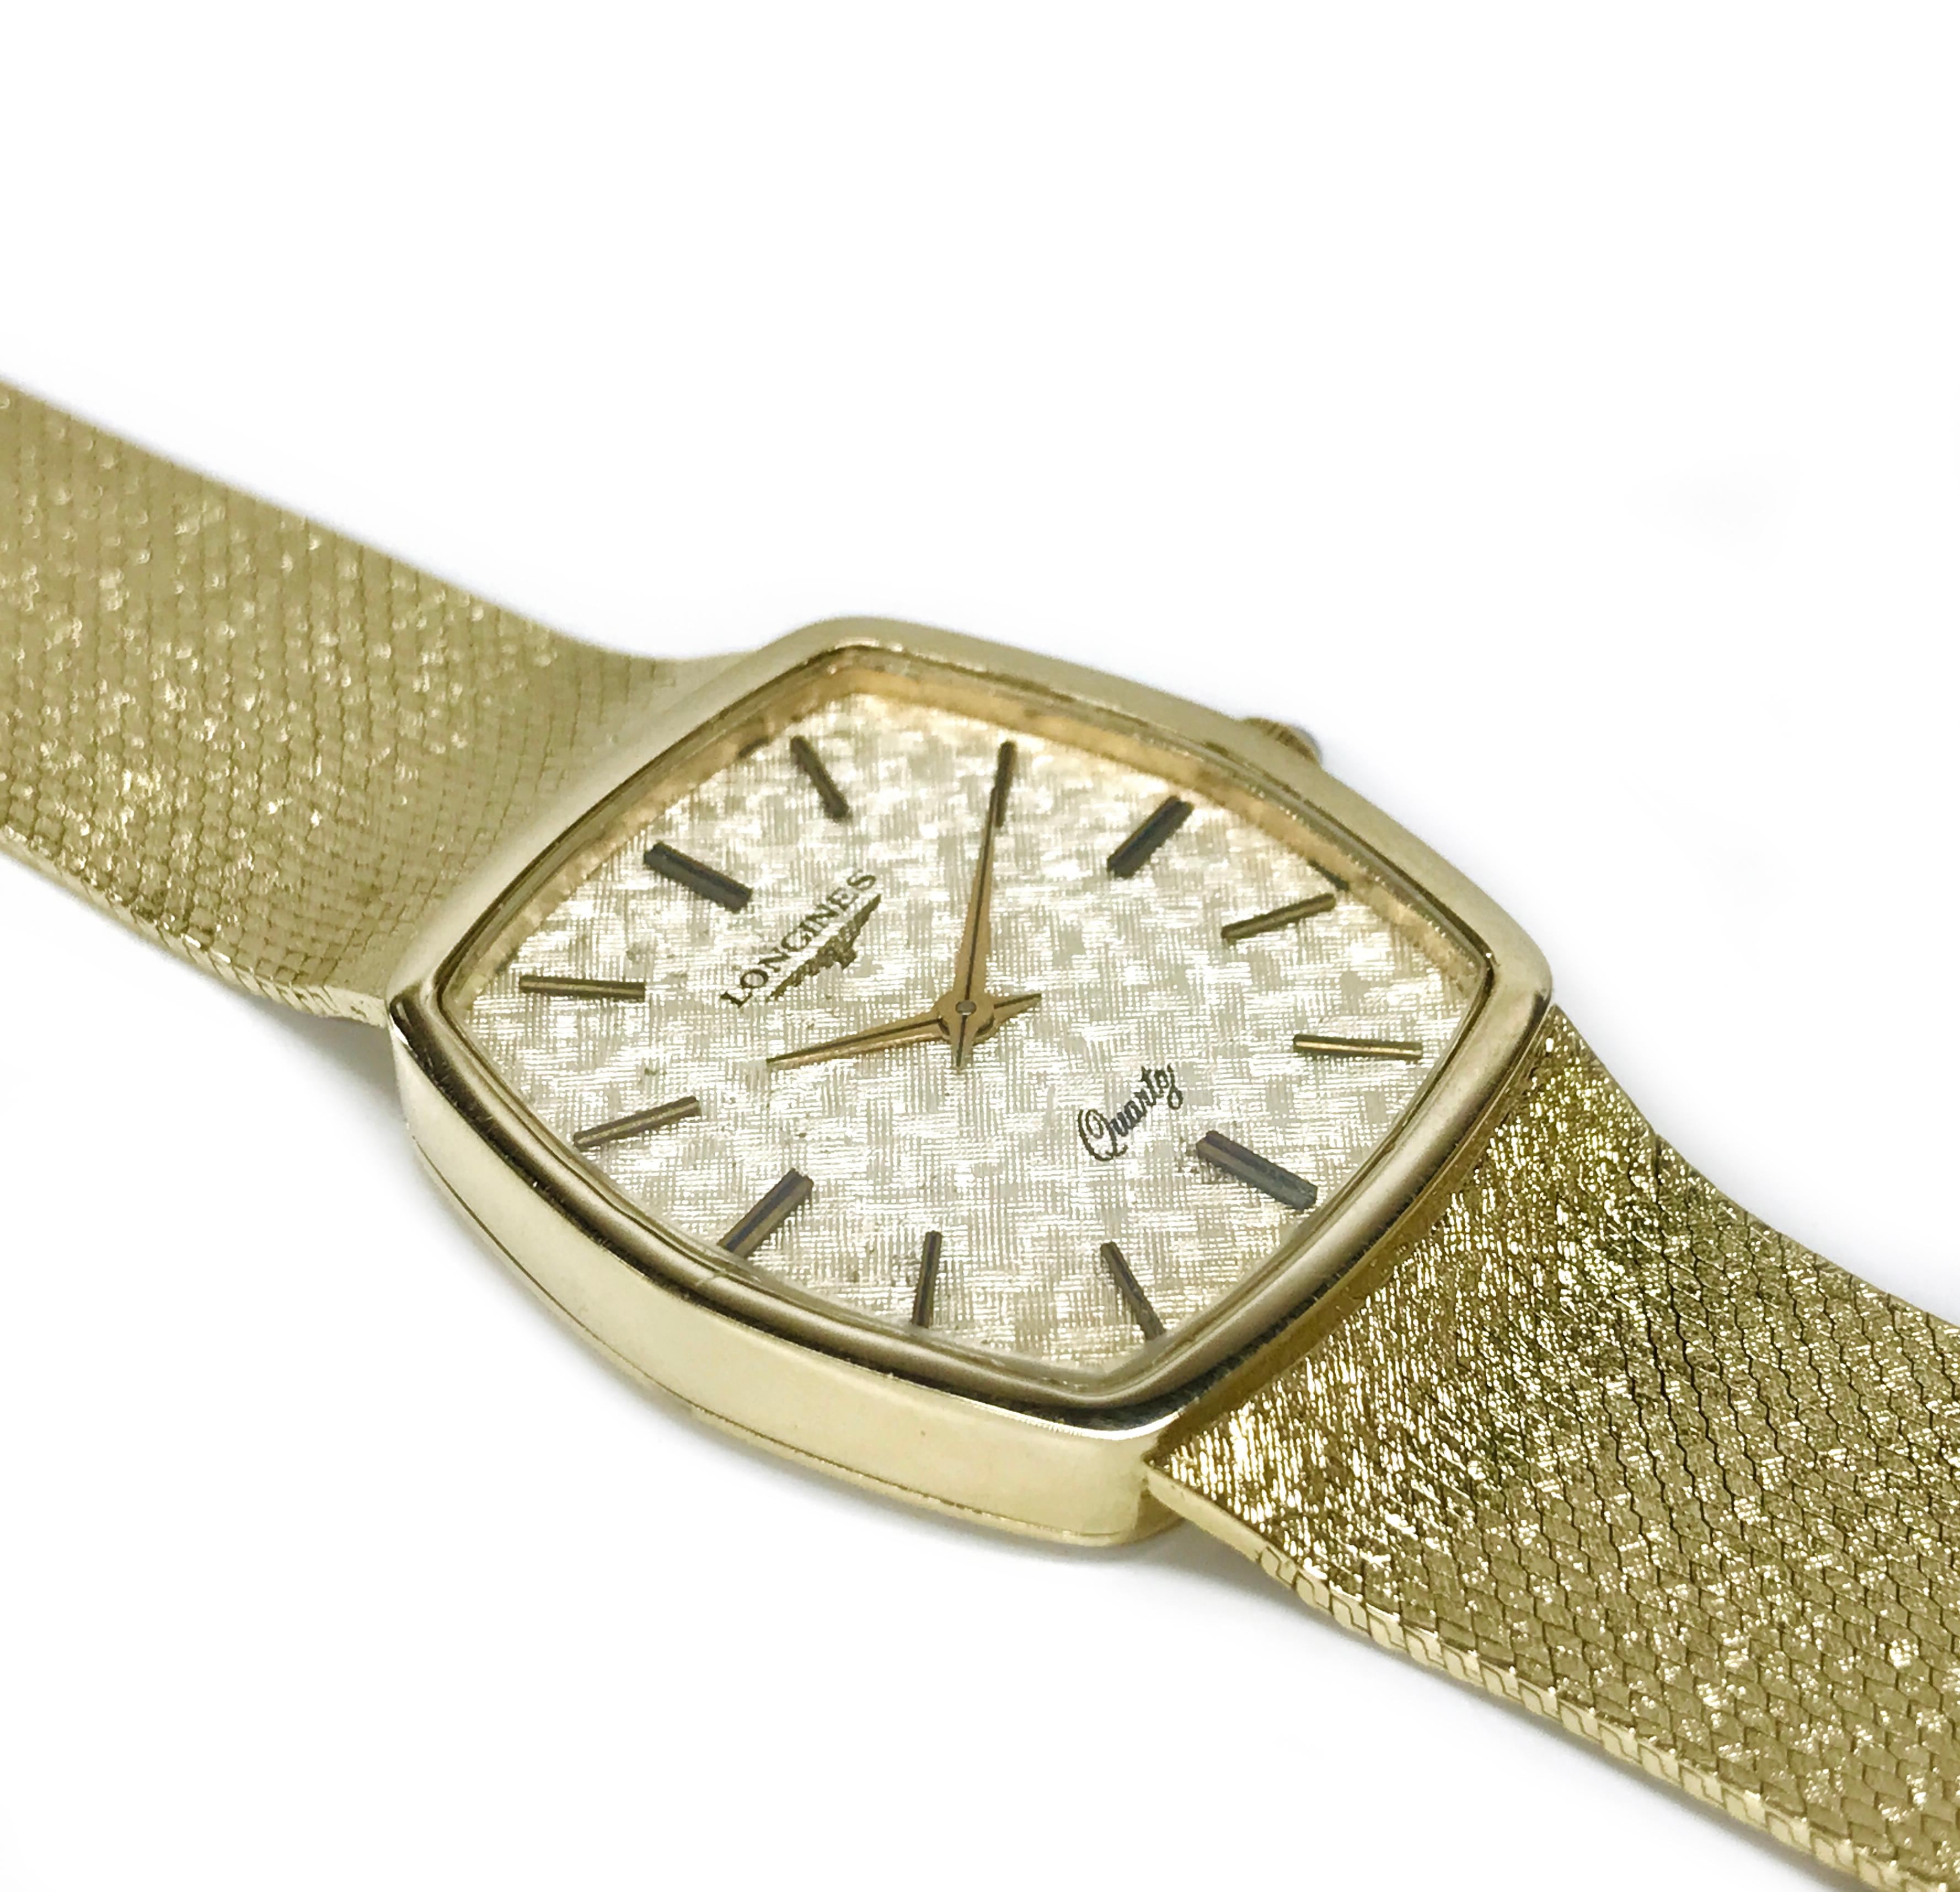 Gentlemen's Longines 14 Karat Gold Watch. This circa 1980s Longines wristwatch features a 14k yellow gold case and mesh-style bracelet with a fold-over style clasp. The watch has gold bar hours and gold alpha-style hour hands. 14k yellow gold